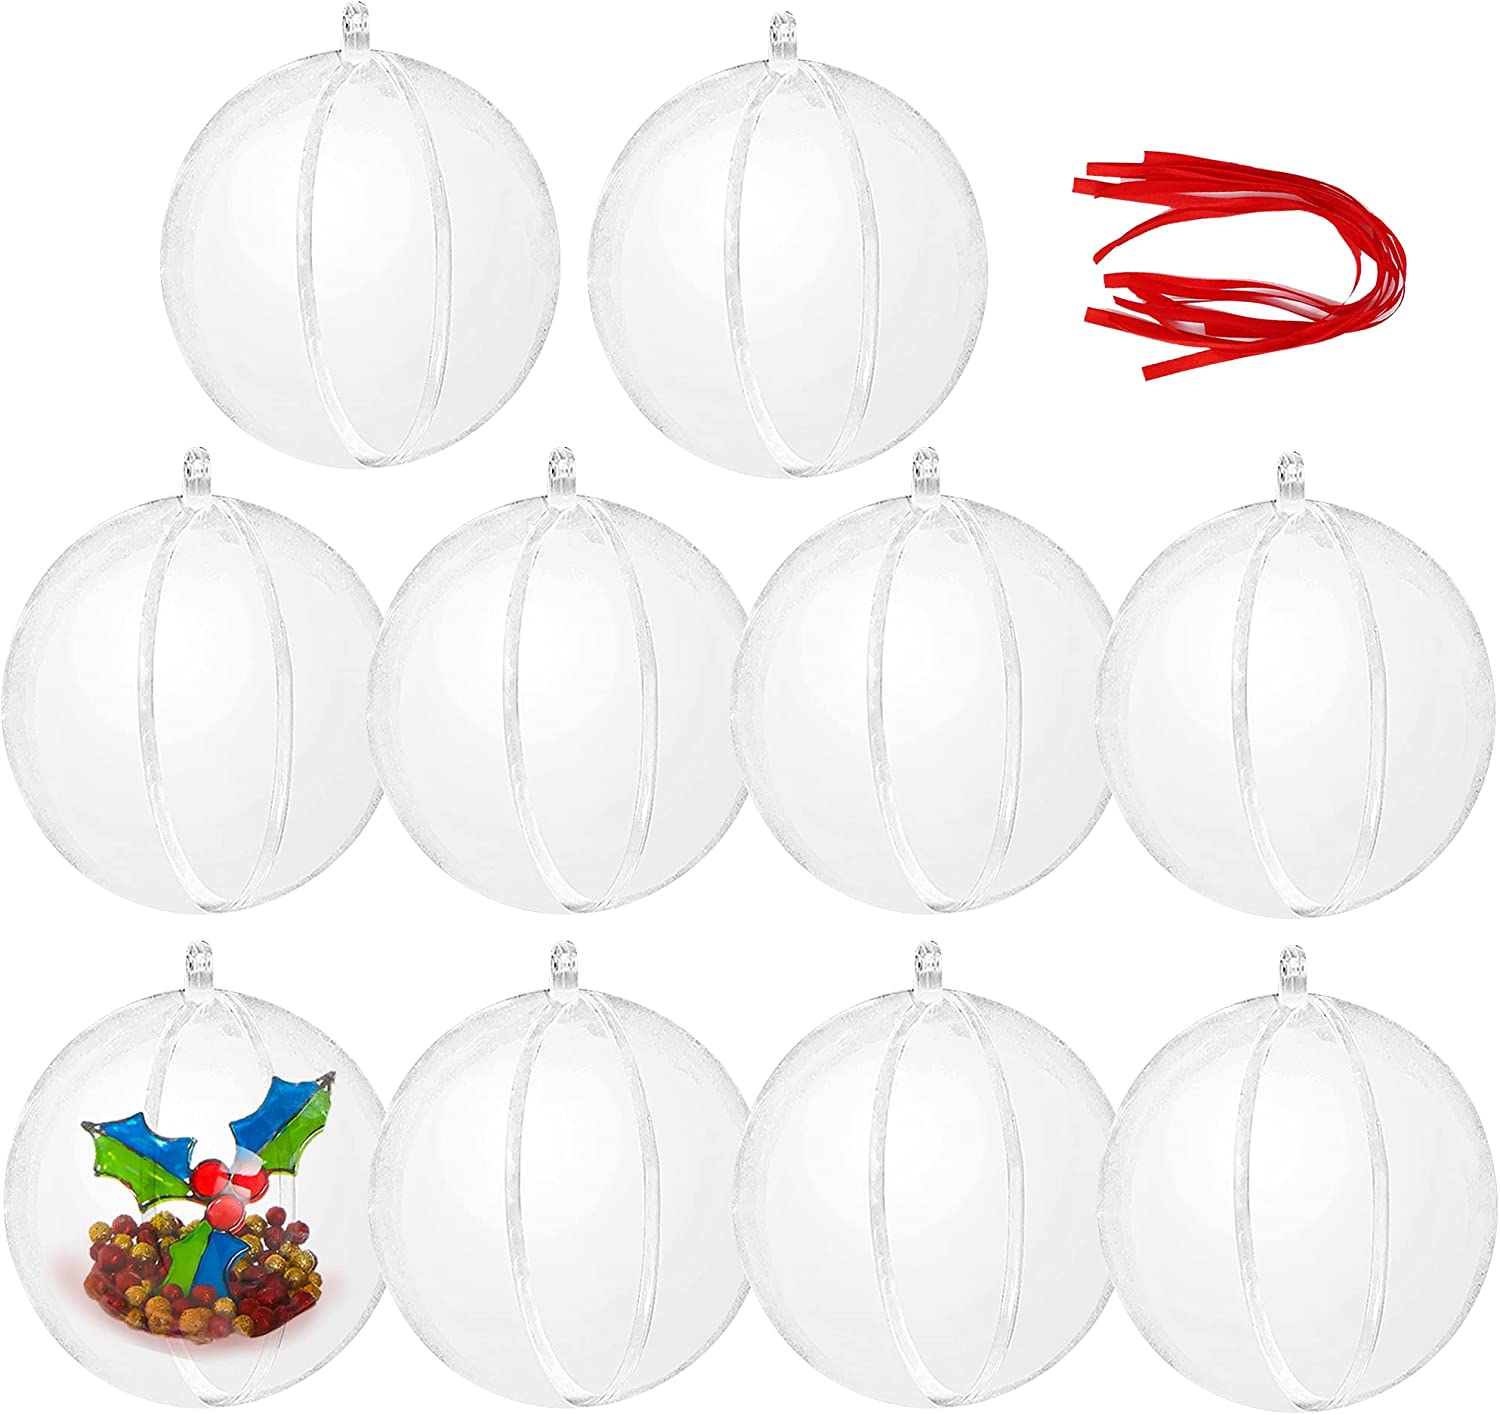 JOIEDOMI  3.5In PLASTIC FILLABLE CHRISTMAS BALL ORNAMENTS, 10 PCS –  Joiedomi